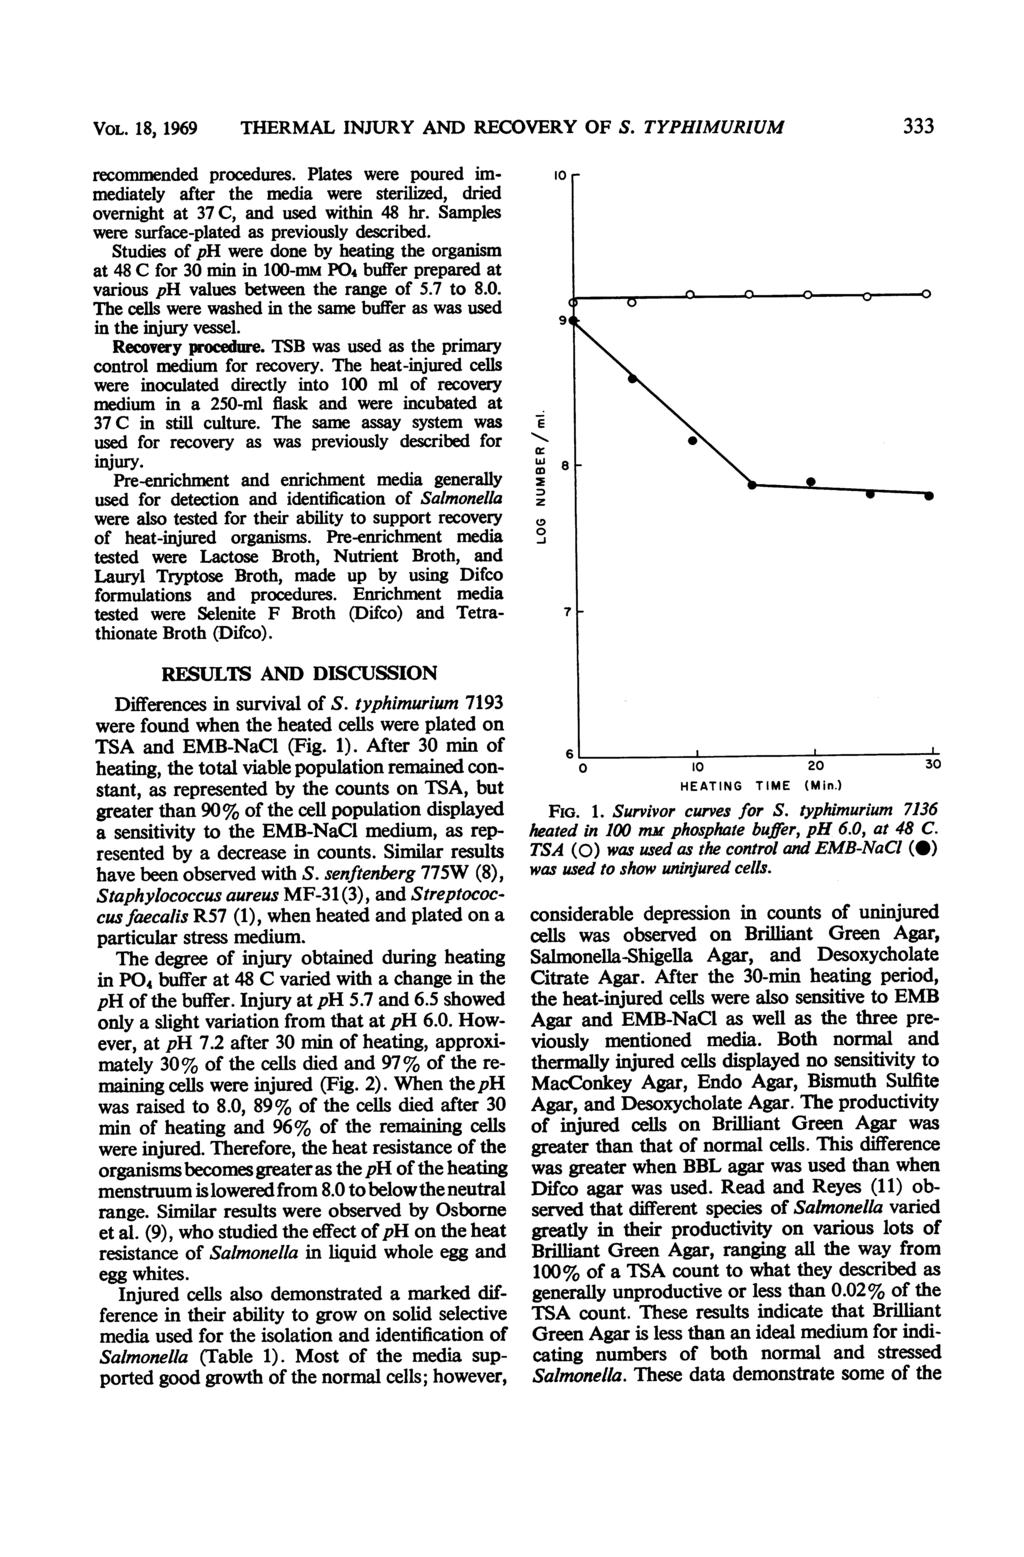 VOL. 18, 1969 THERMAL INJURY AND RECOVERY OF S. TYPHIMURIUM 333 recommended procedures. Plates were poured immediately after the media were sterilied, dried overnight at 37 C, and used within 48 hr.